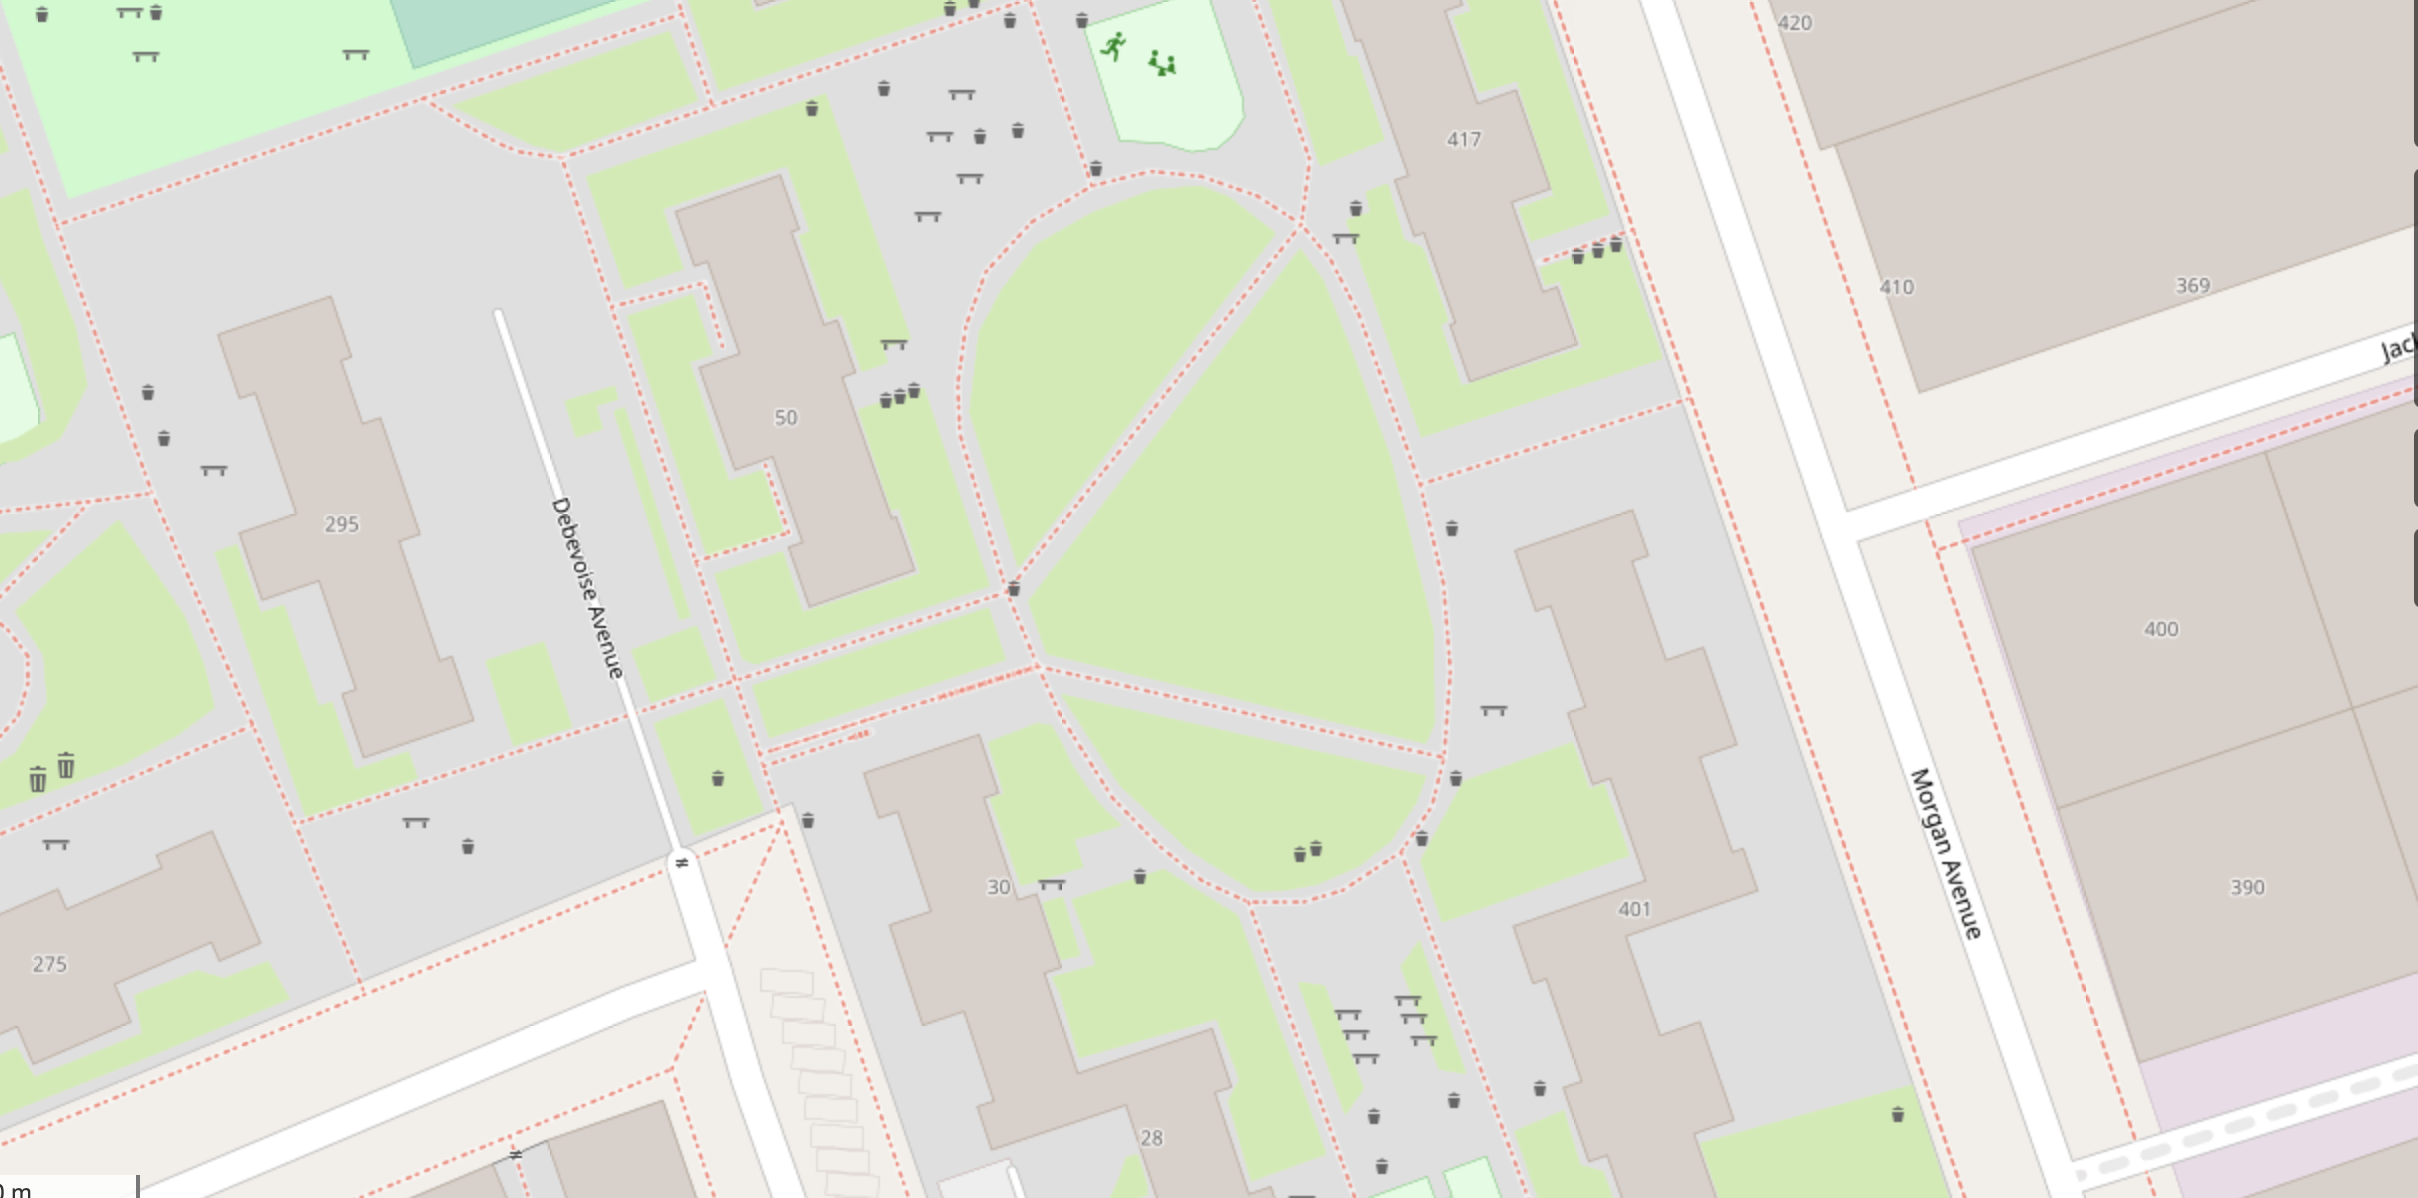 A digital map of a housing complex in Brooklyn in light green, grey and different shades of white. Small black spots marking different amenities are spread throughout the map.